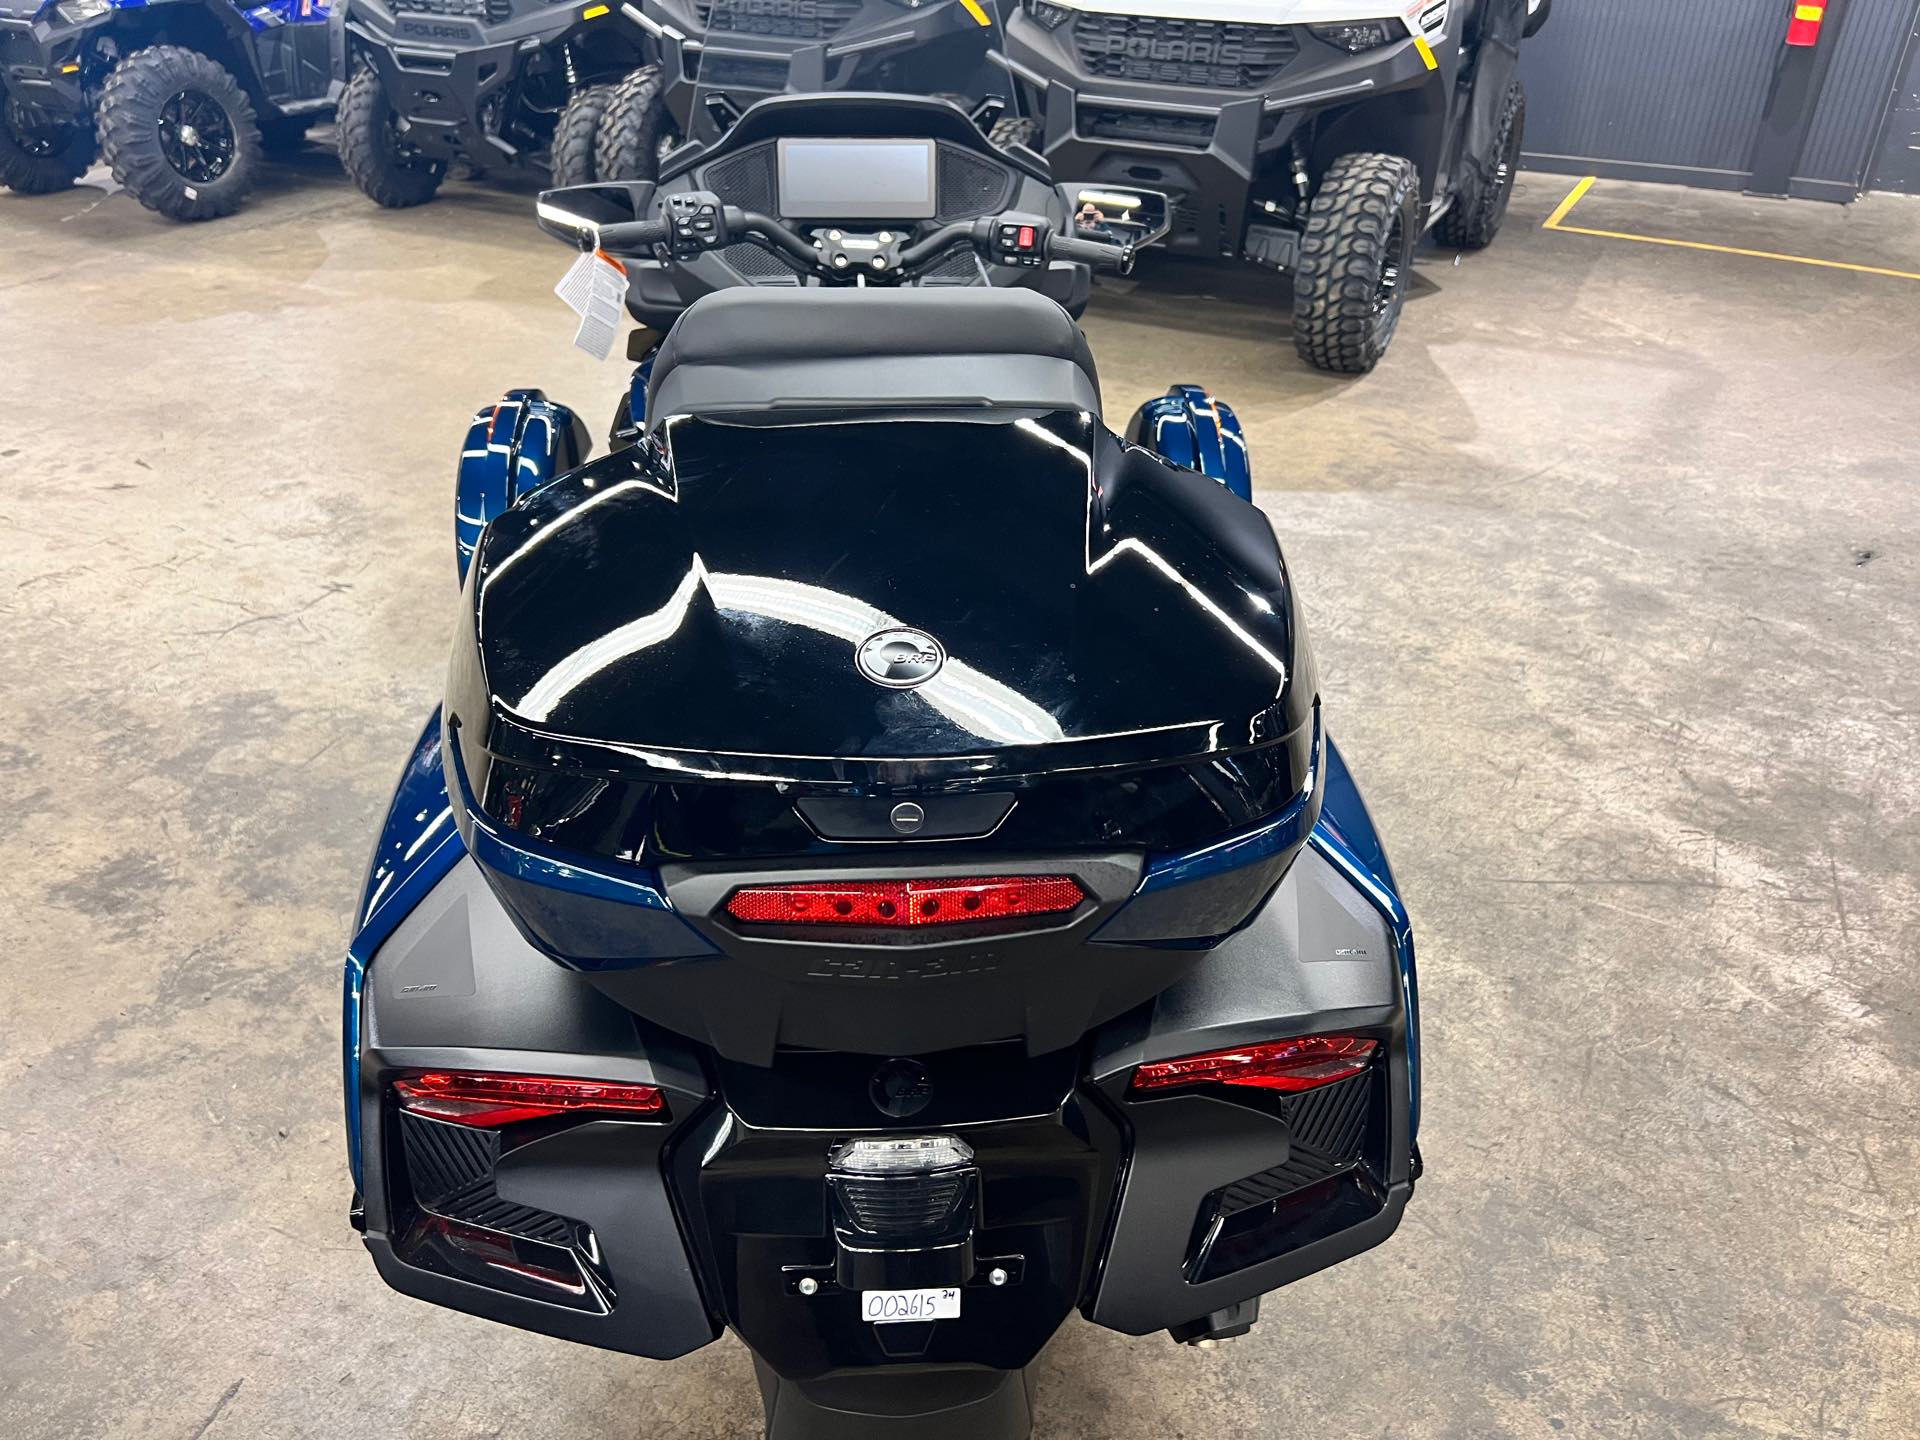 2024 Can-Am Spyder RT Limited at Sloans Motorcycle ATV, Murfreesboro, TN, 37129